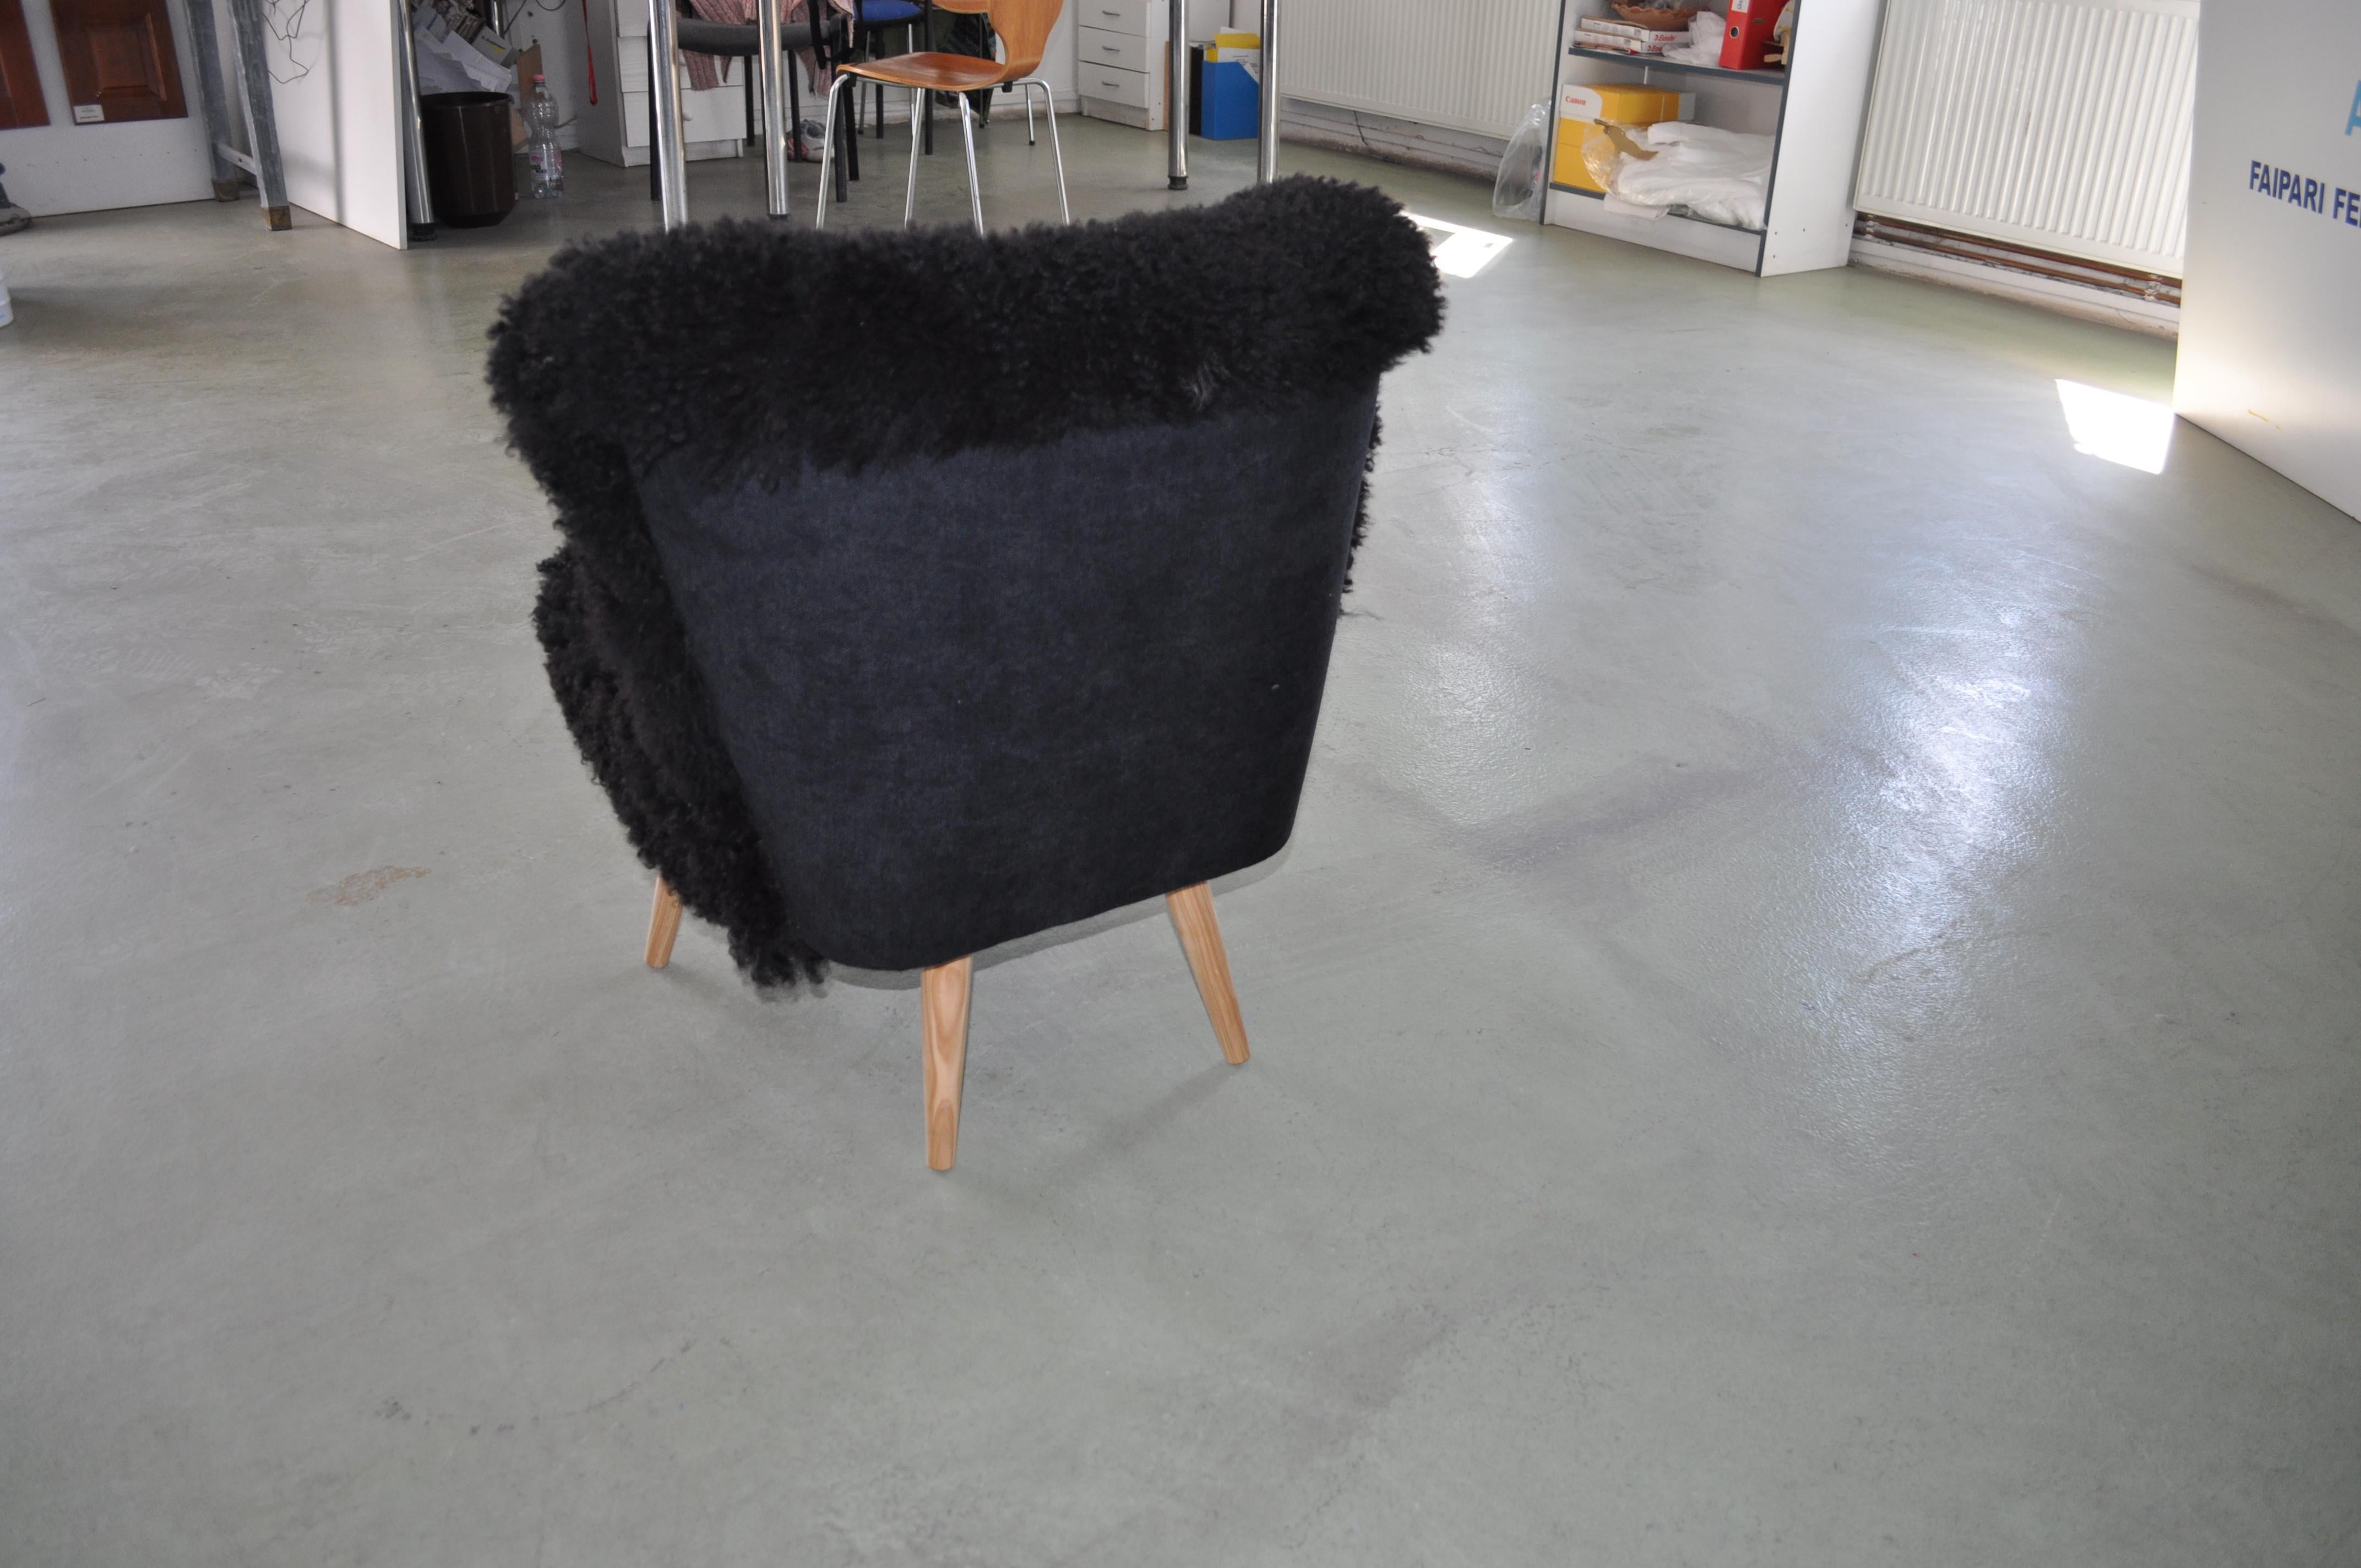 Sheepskin cocktail club chair.
New chair, black sheepskin and beech legs.
This has been reupholstered with black lambs-skin. A very exceptional club chair reupholstered with a sheepskin fur. Solid ash legs.
This beautiful chair would look lovely